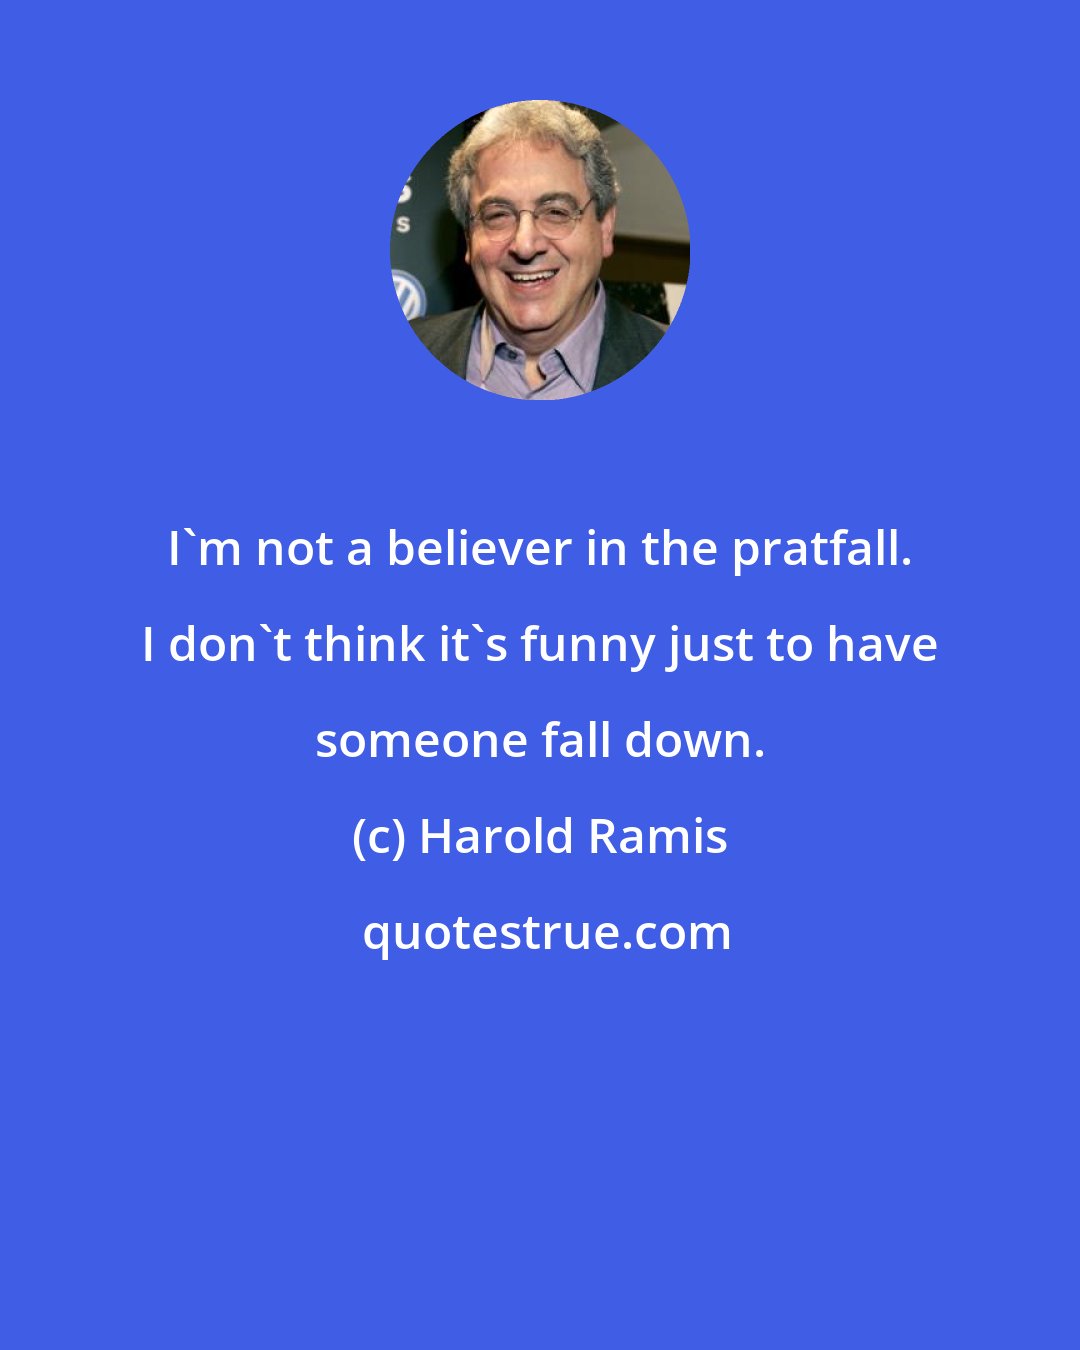 Harold Ramis: I'm not a believer in the pratfall. I don't think it's funny just to have someone fall down.